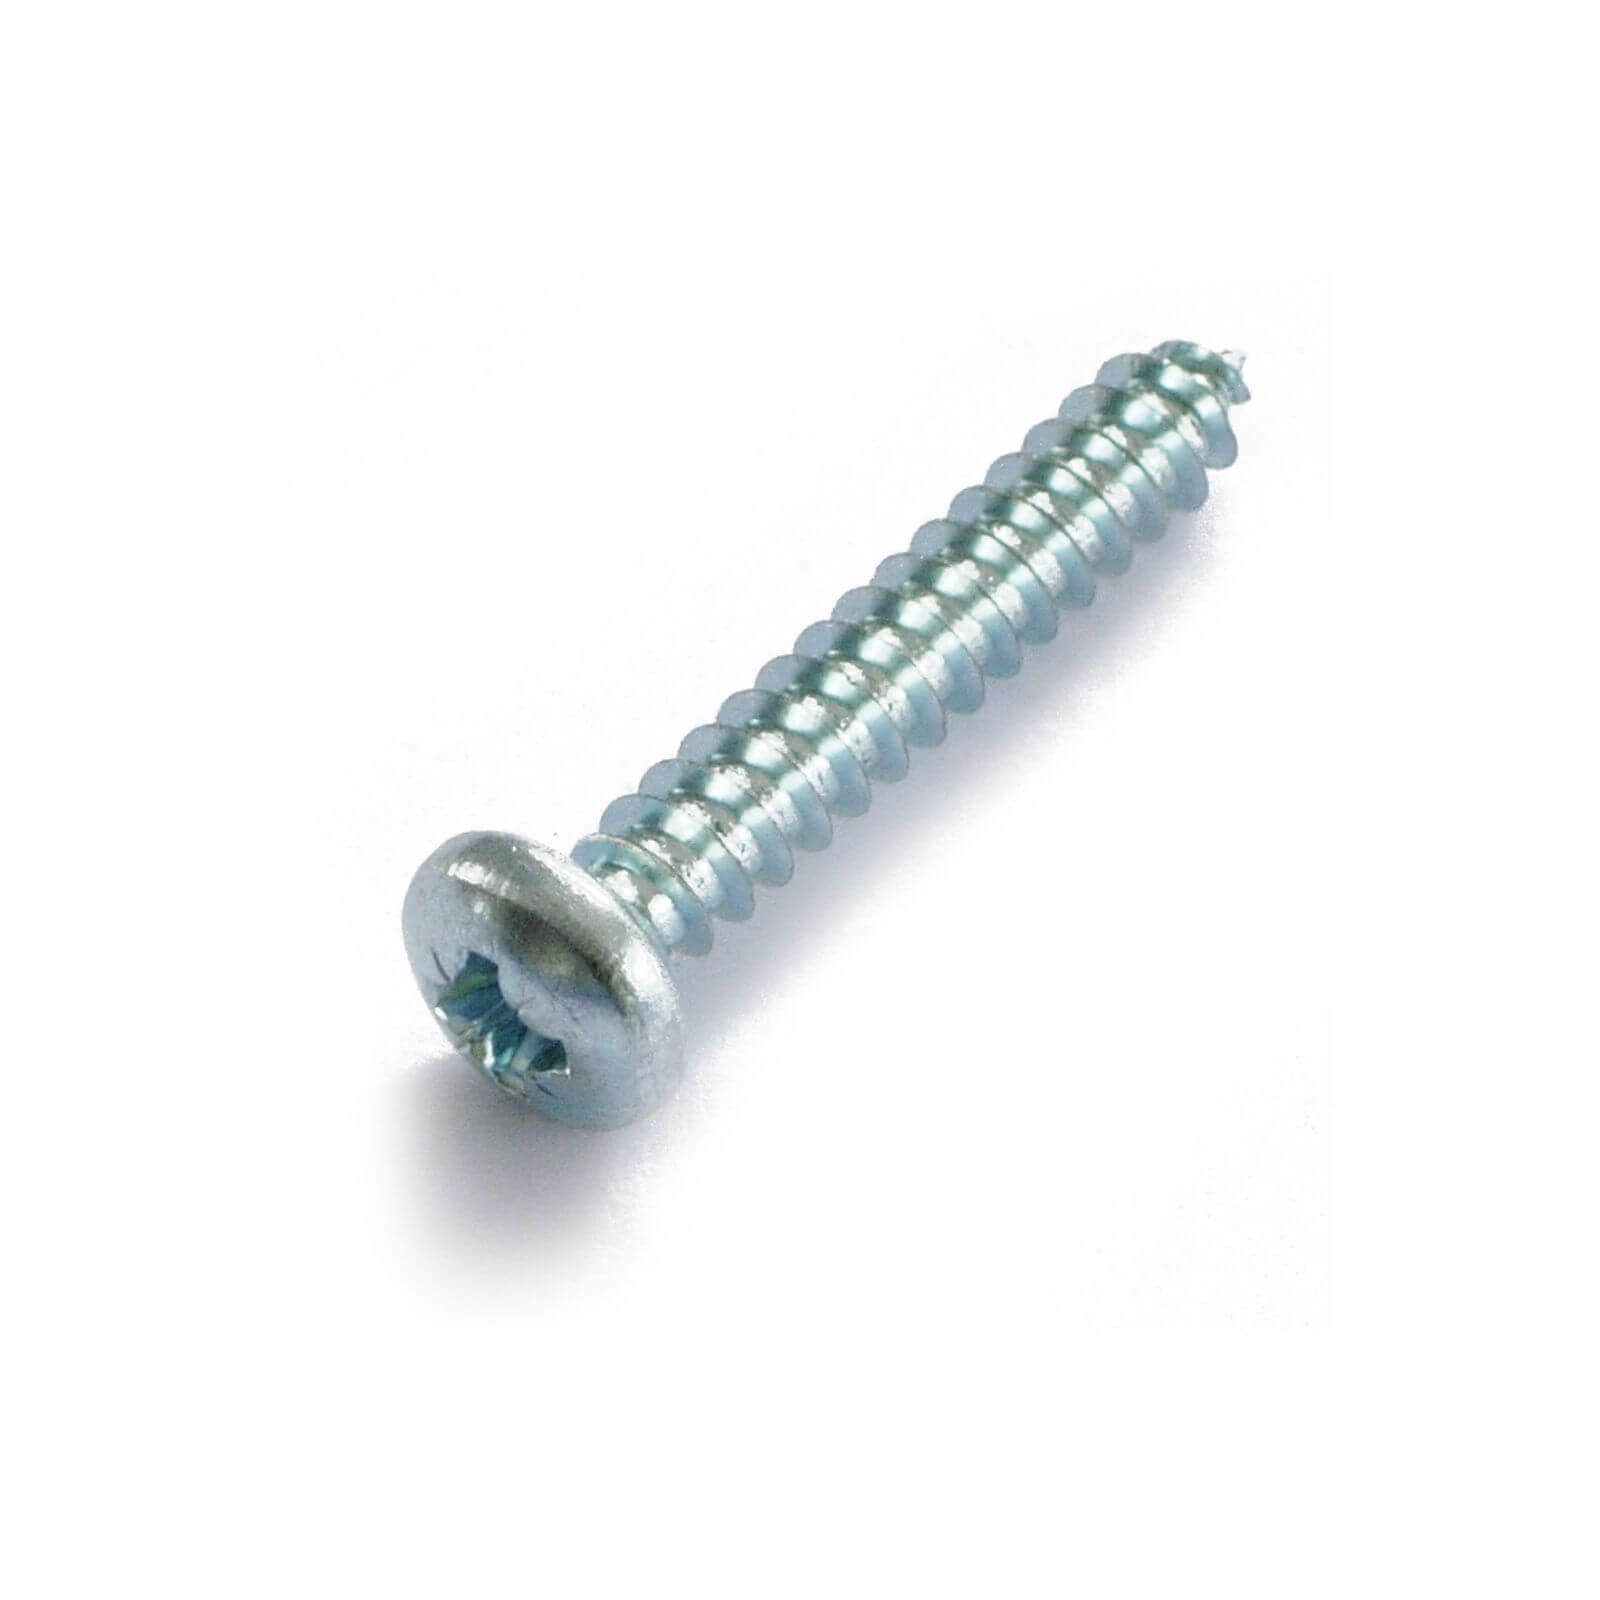 Self Tapping Screw - Bright Zinc Plated - 4 x 20mm - 10 Pack